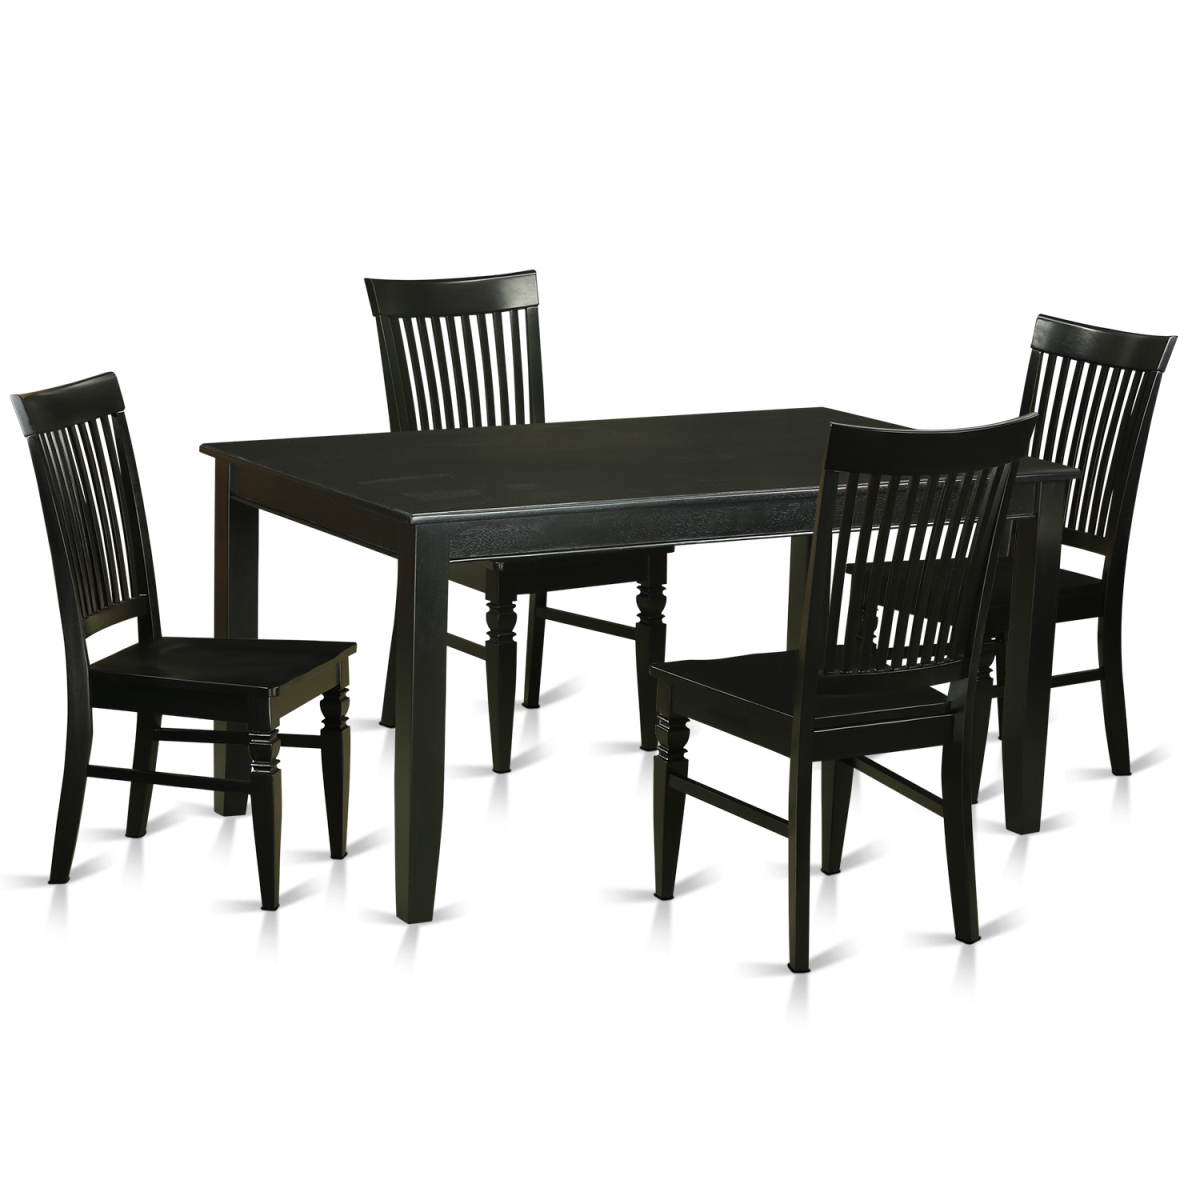 Duwe5-blk-w Dinette Table Set With 4 Kitchen Table & 4 Chairs, Black - 5 Piece